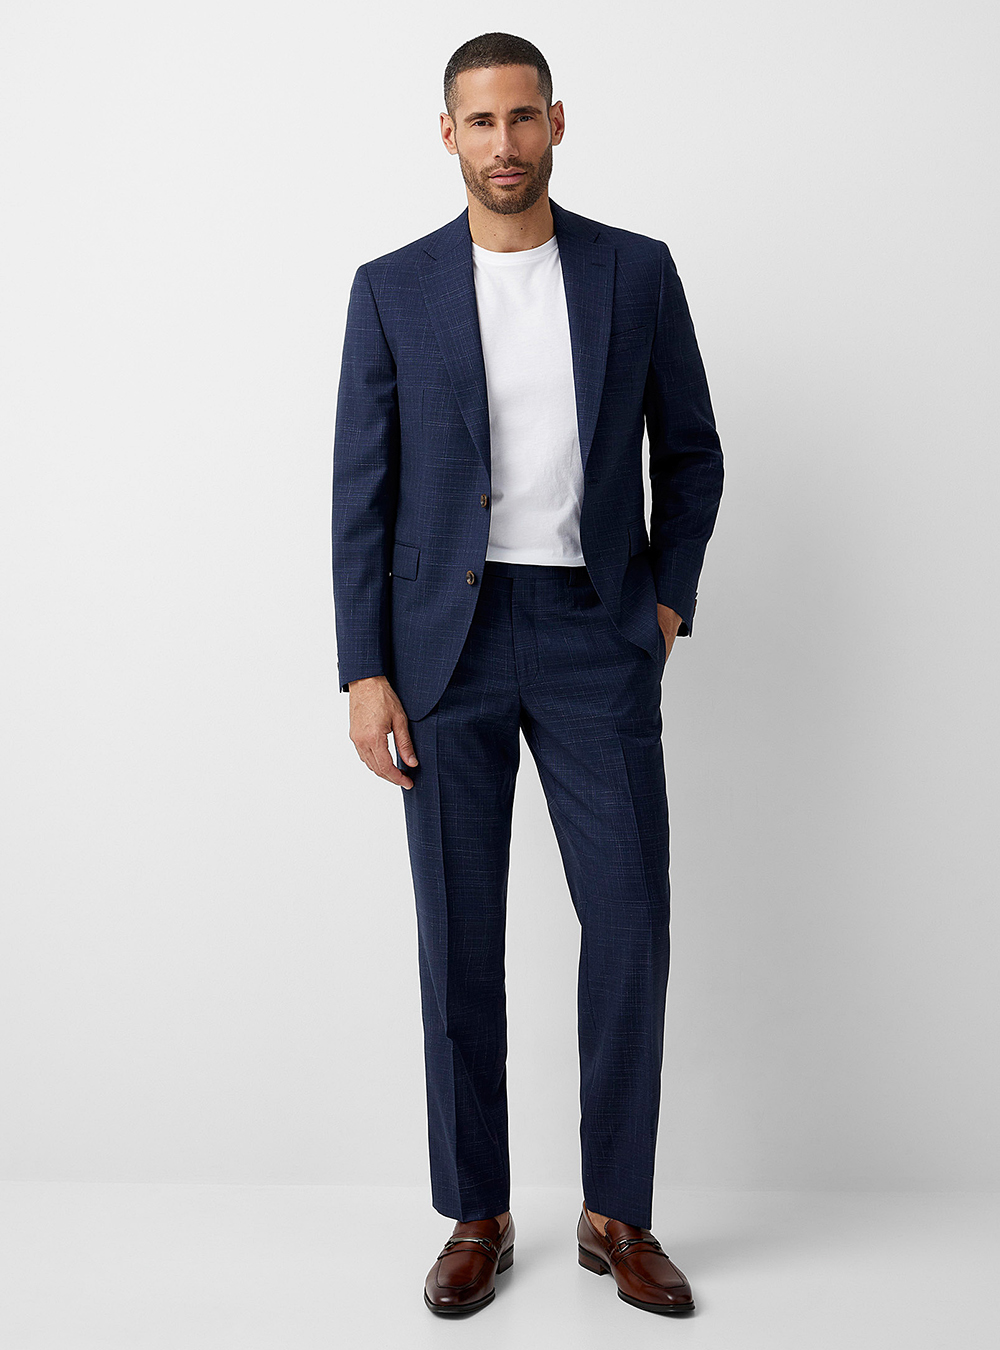 navy blue suit, white t-shirt, and brown loafers with no socks